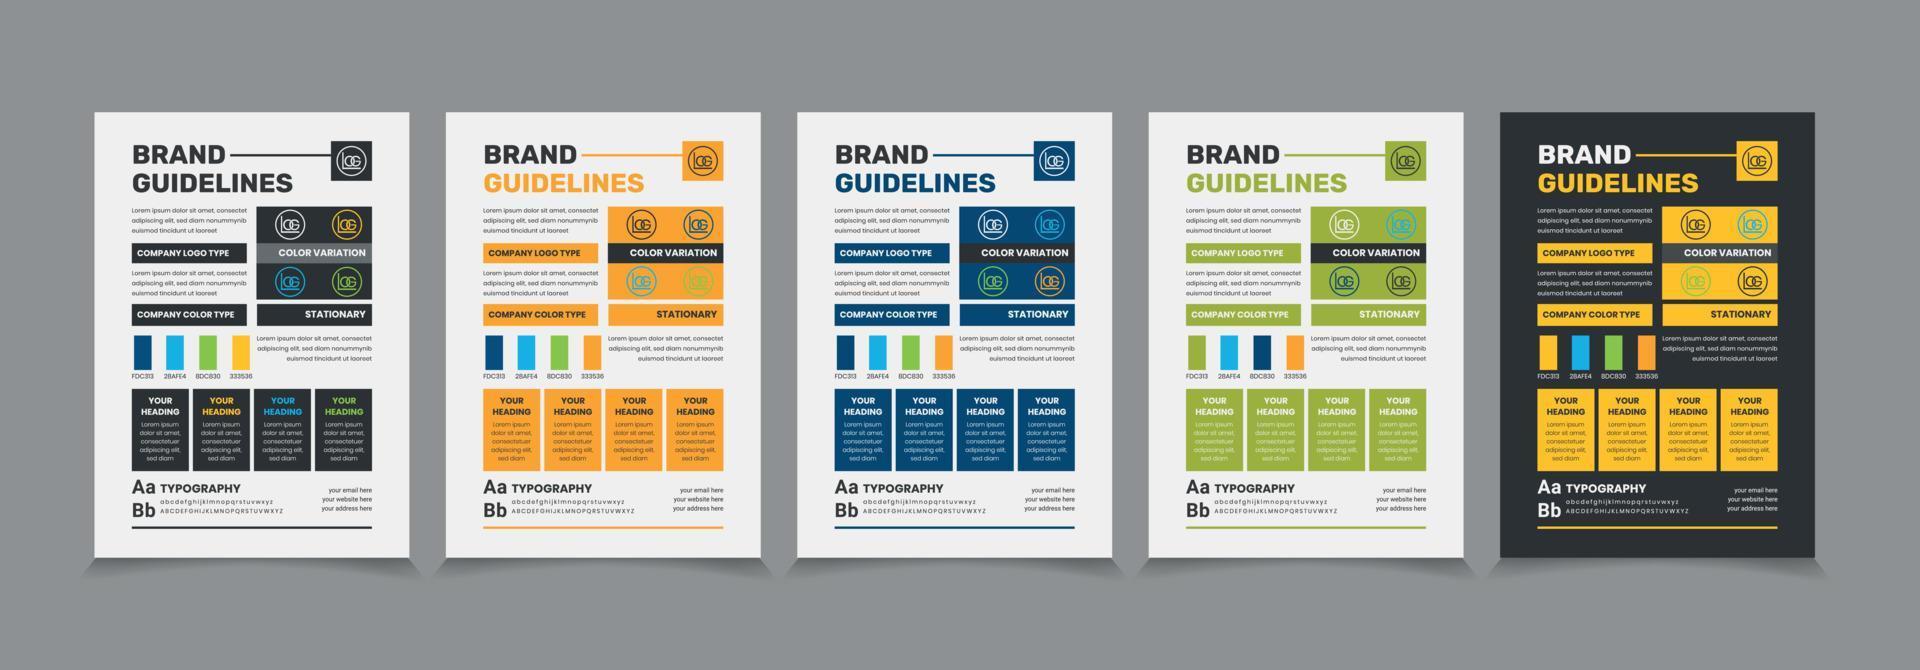 A4 Brand Guidelines Poster Layout Set, Simple style and modern Brand Guidelines, Brand identity Template. vector